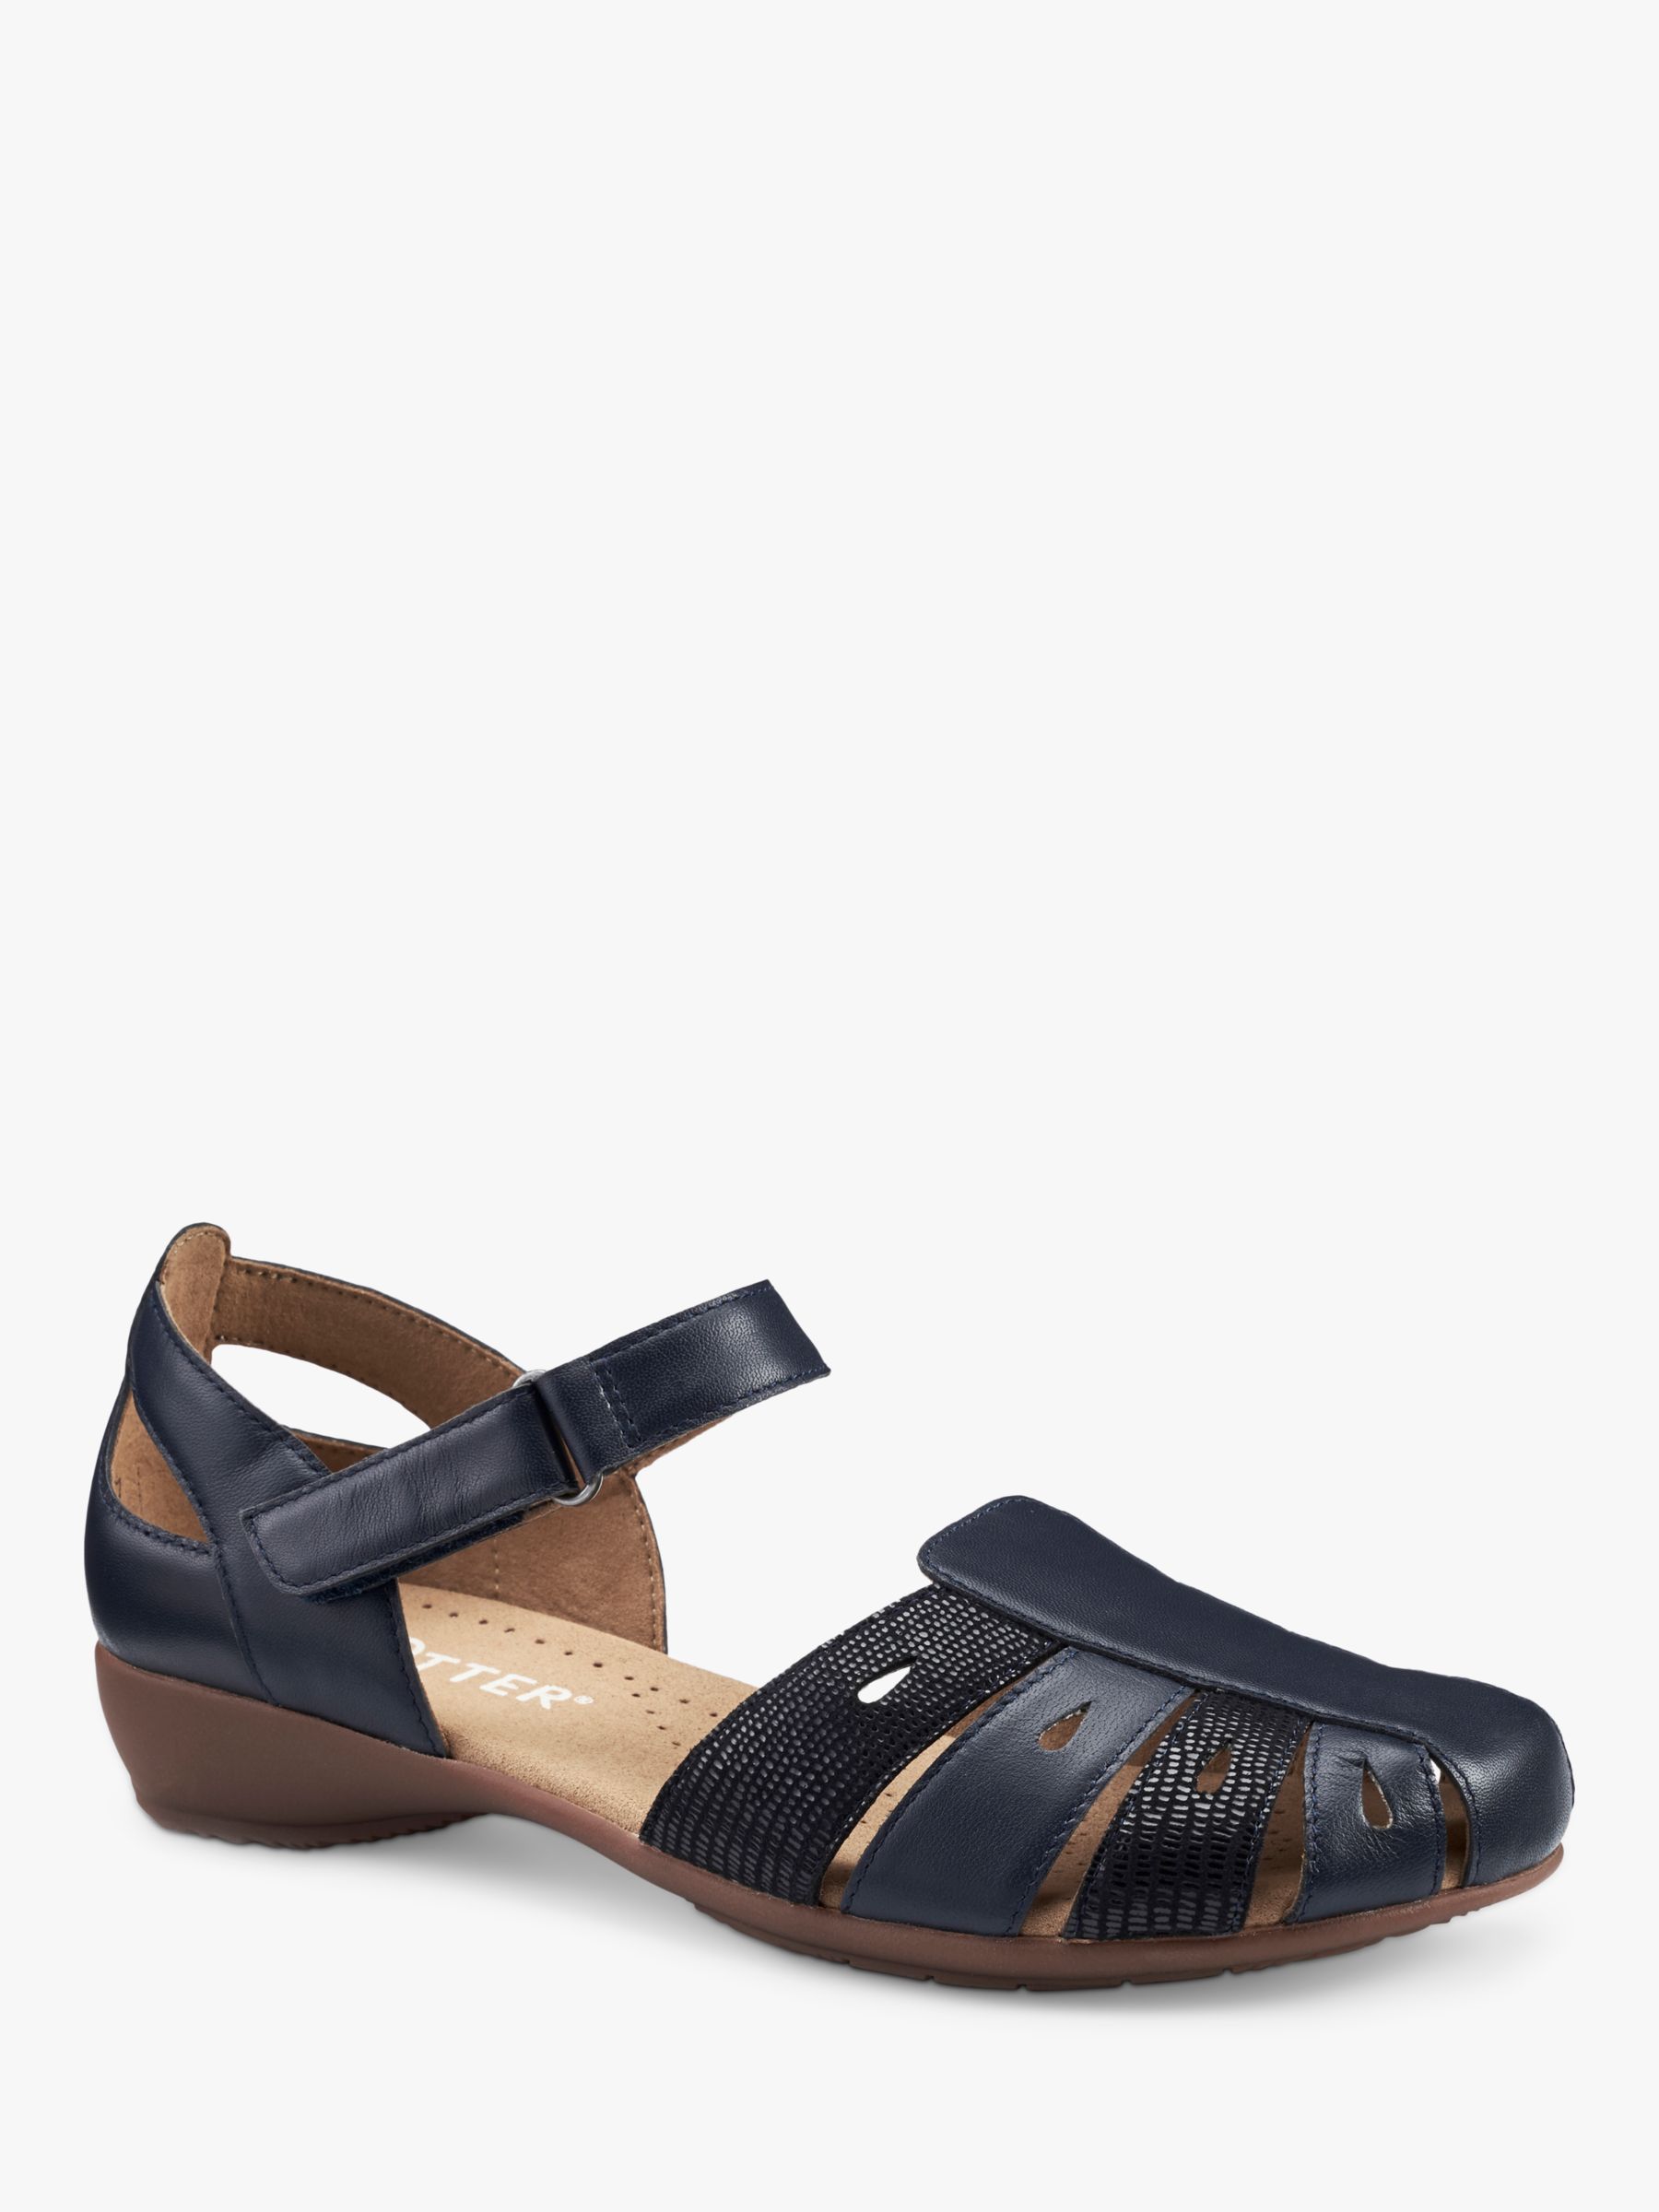 Buy Hotter May Wide Fit Faux Lizard Fisherman Style Sandals, Navy Online at johnlewis.com